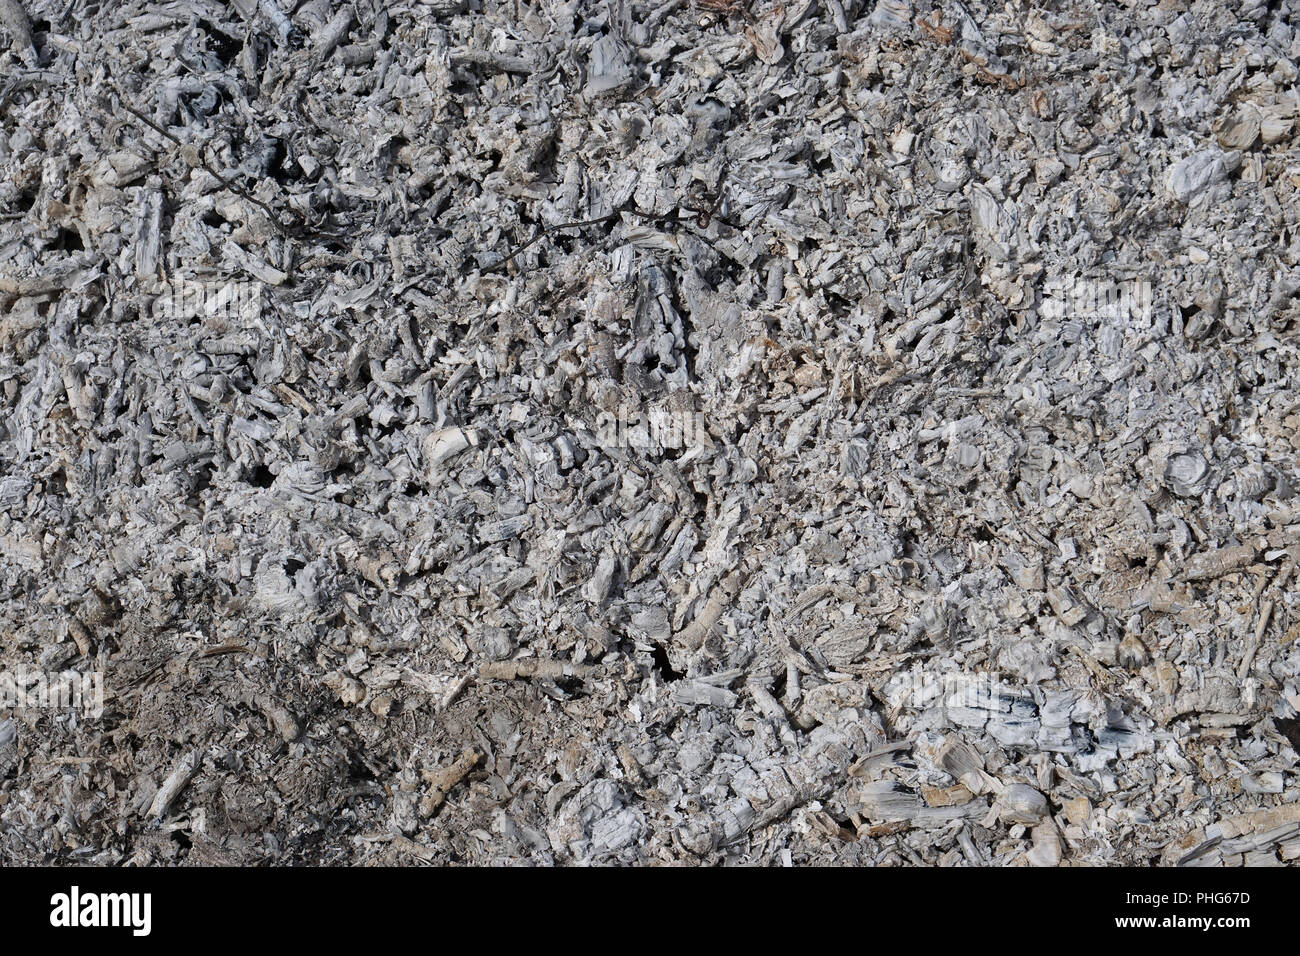 Ashes and pieces of coals background Stock Photo